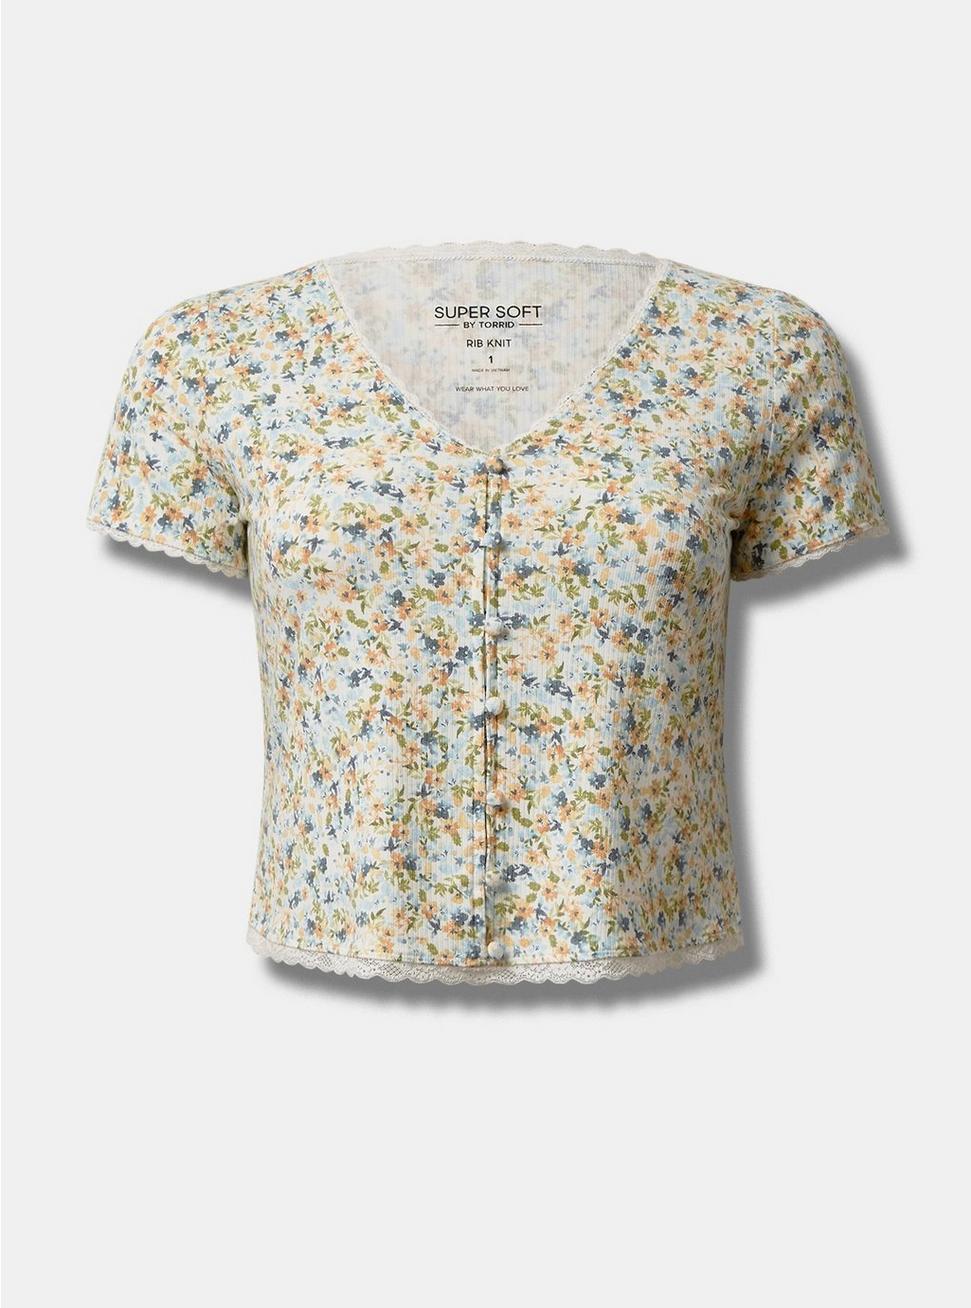 Fitted Supersoft Rib V-Neck Lace Trim Button Crop Tee, DITSY FLORAL, hi-res